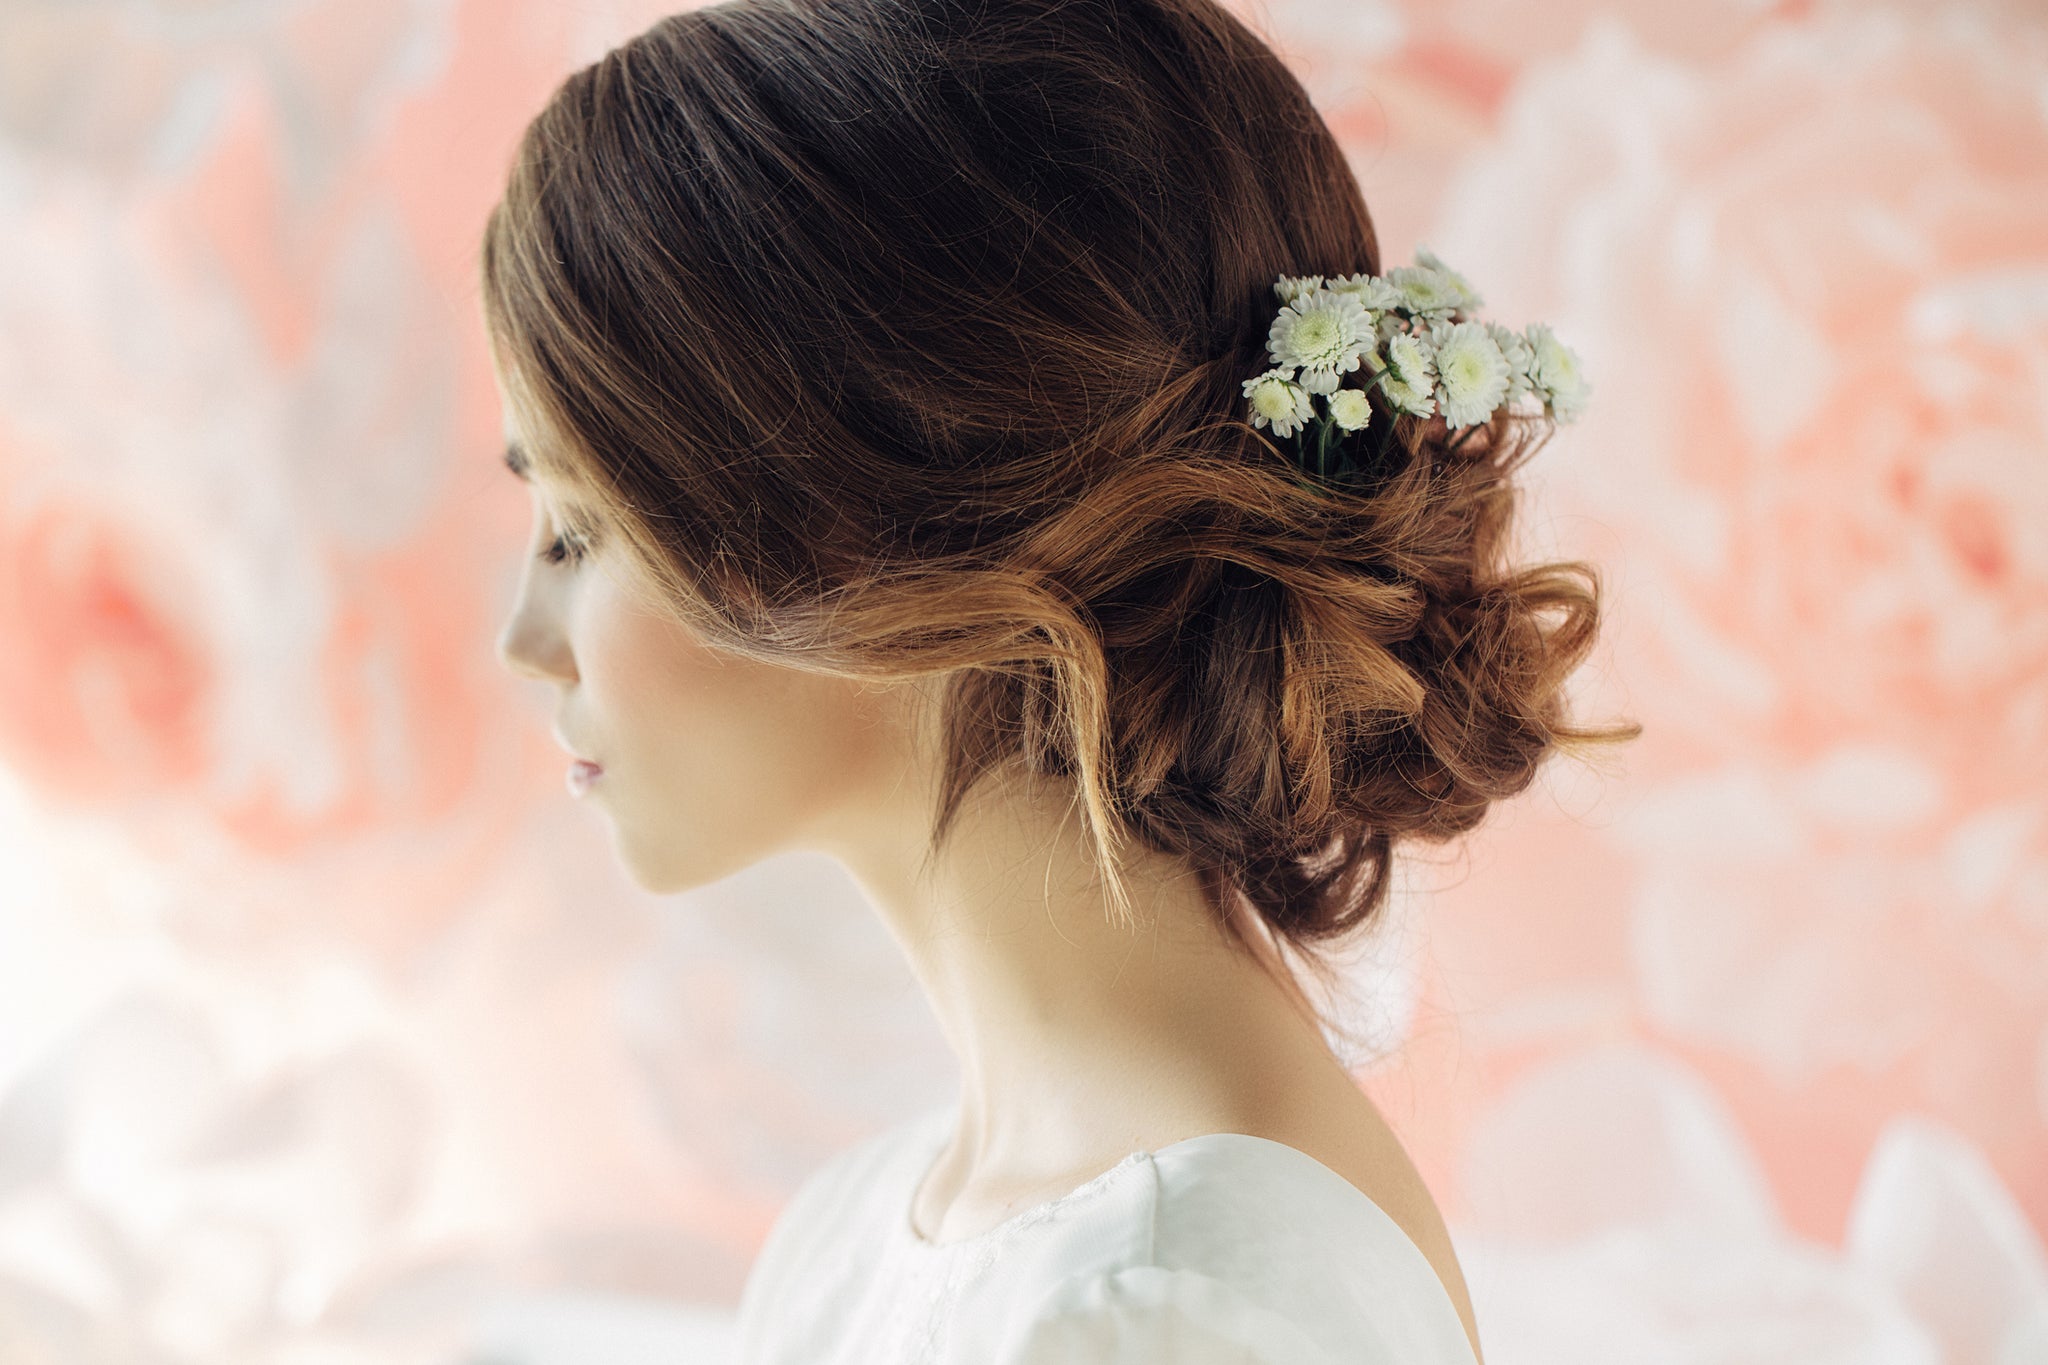 Wedding Hair: Get the Hair of Your Dreams for Your Big Day